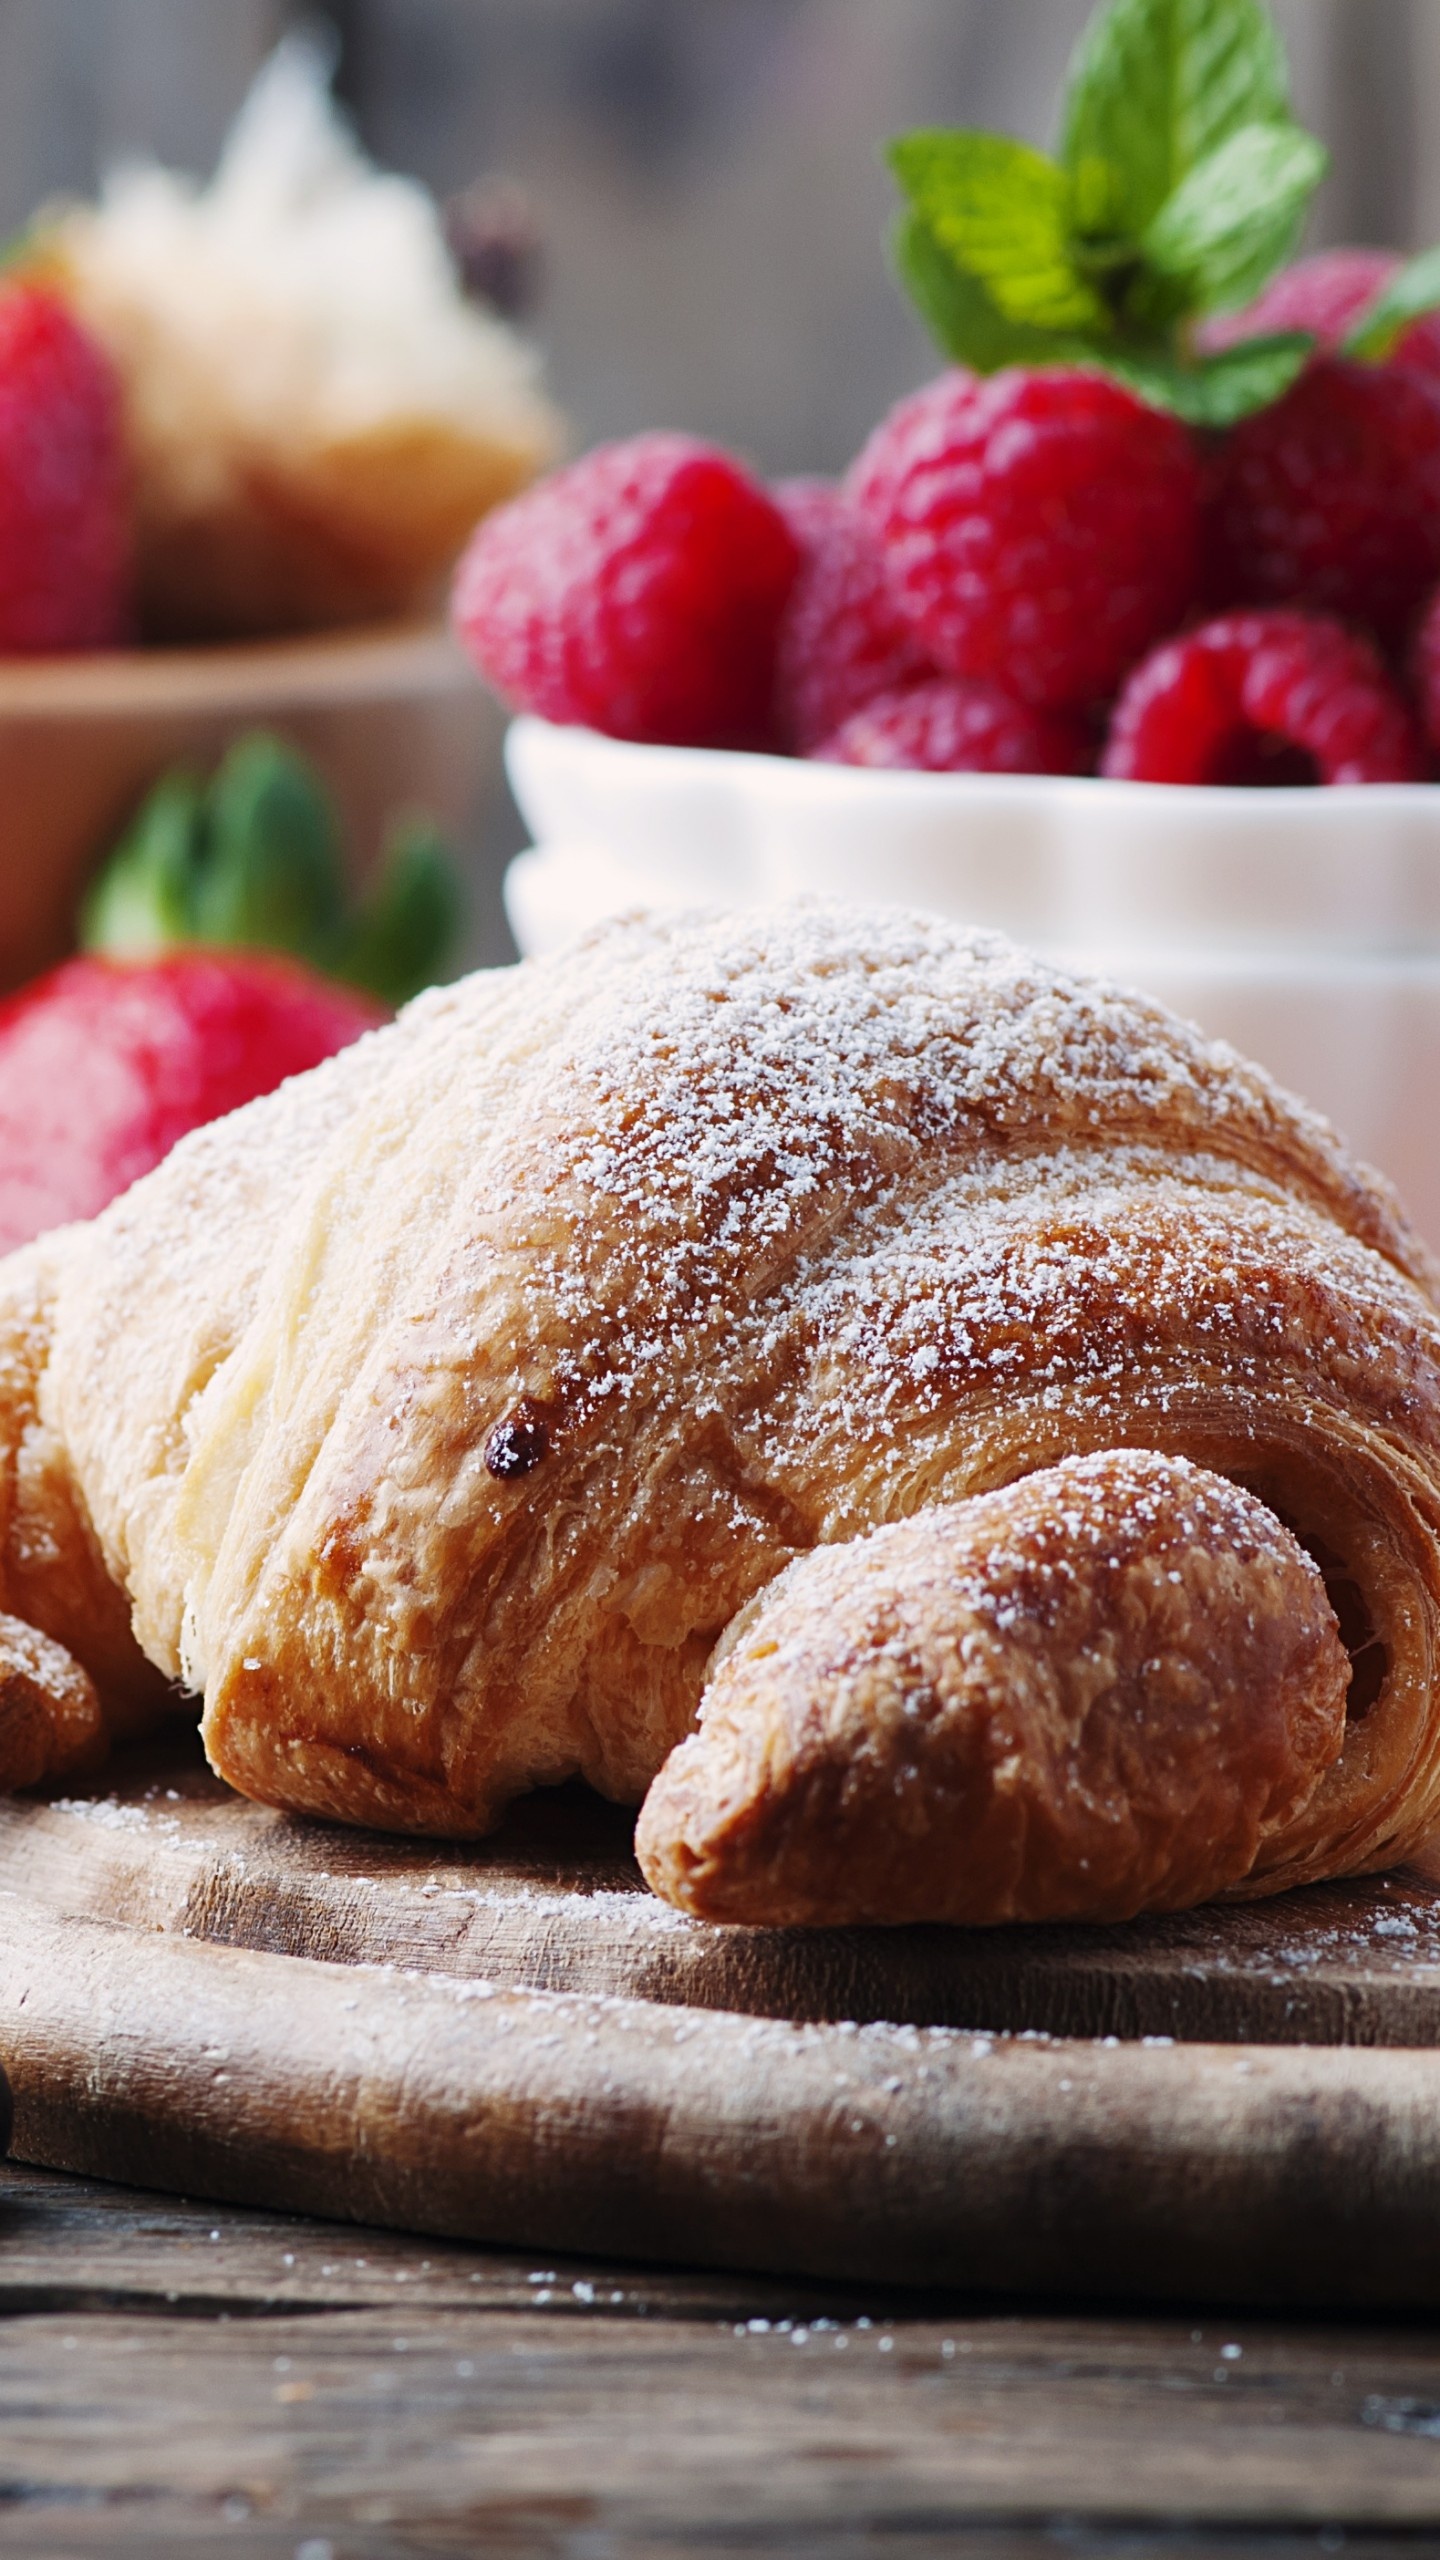 Croissant: A French pastry that is widely known for its crescent shape. 1440x2560 HD Background.